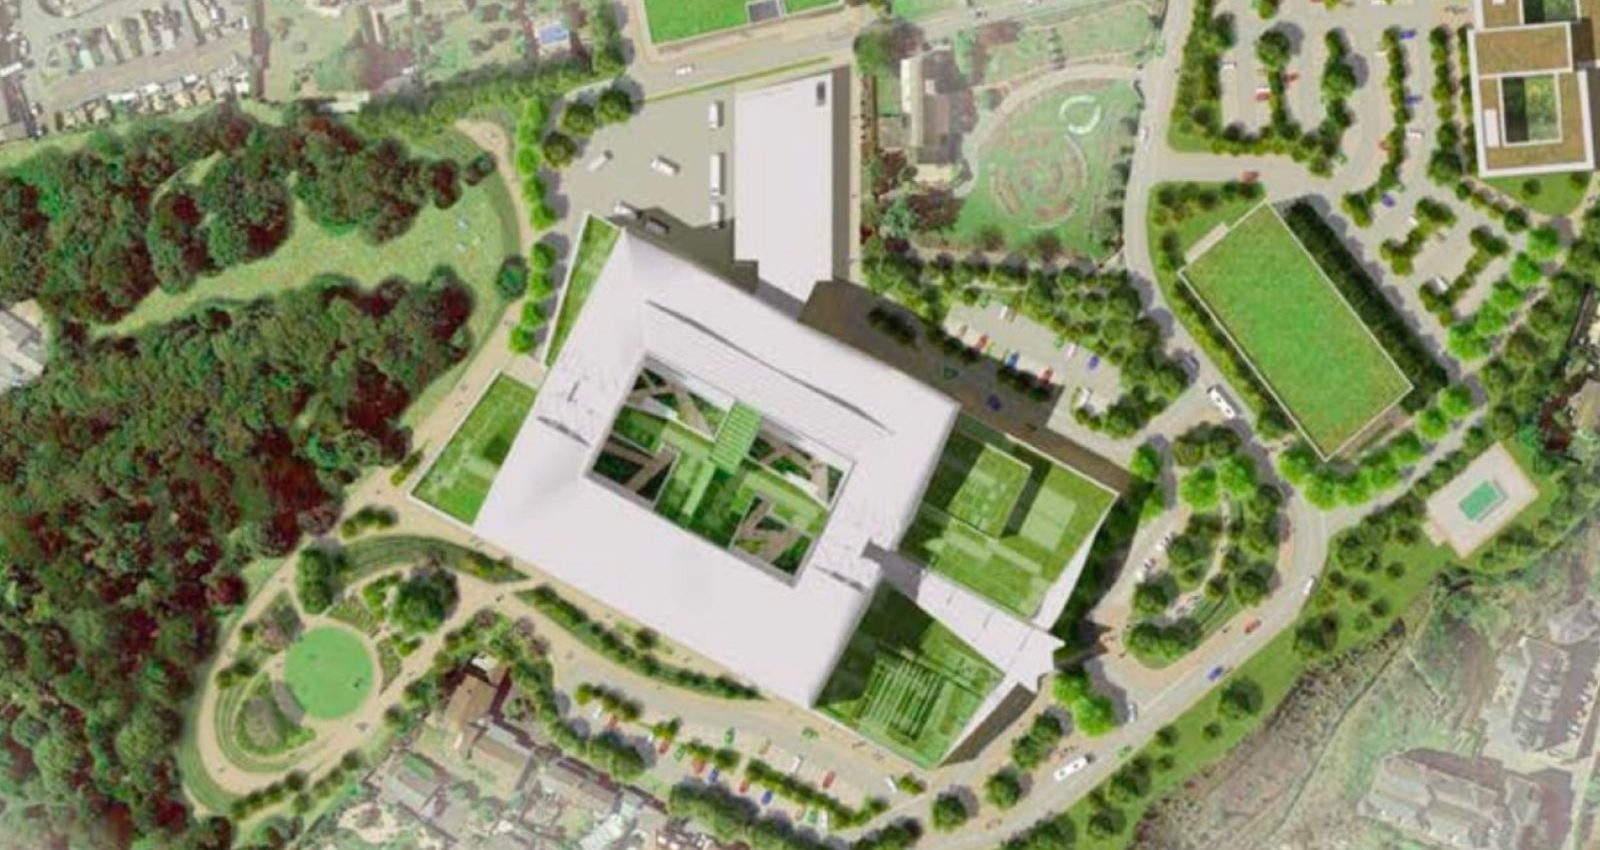 Birds eye of grounds for Future Hospital, St Helier, Jersey